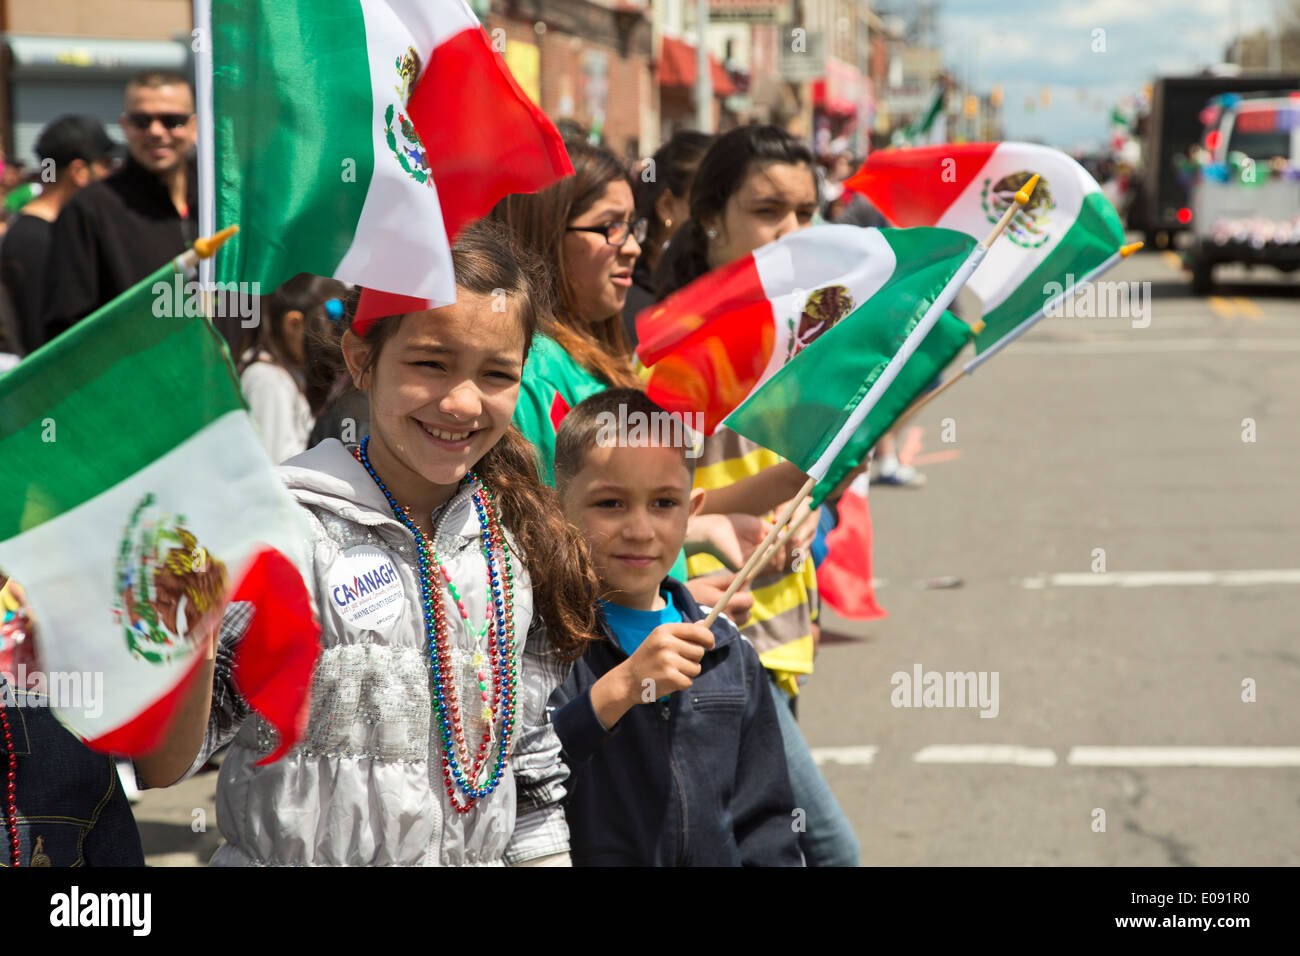 Detroit, Michigan - The annual Cinco de Mayo parade in the Mexican-American neighborhood of southwest Detroit. Stock Photo